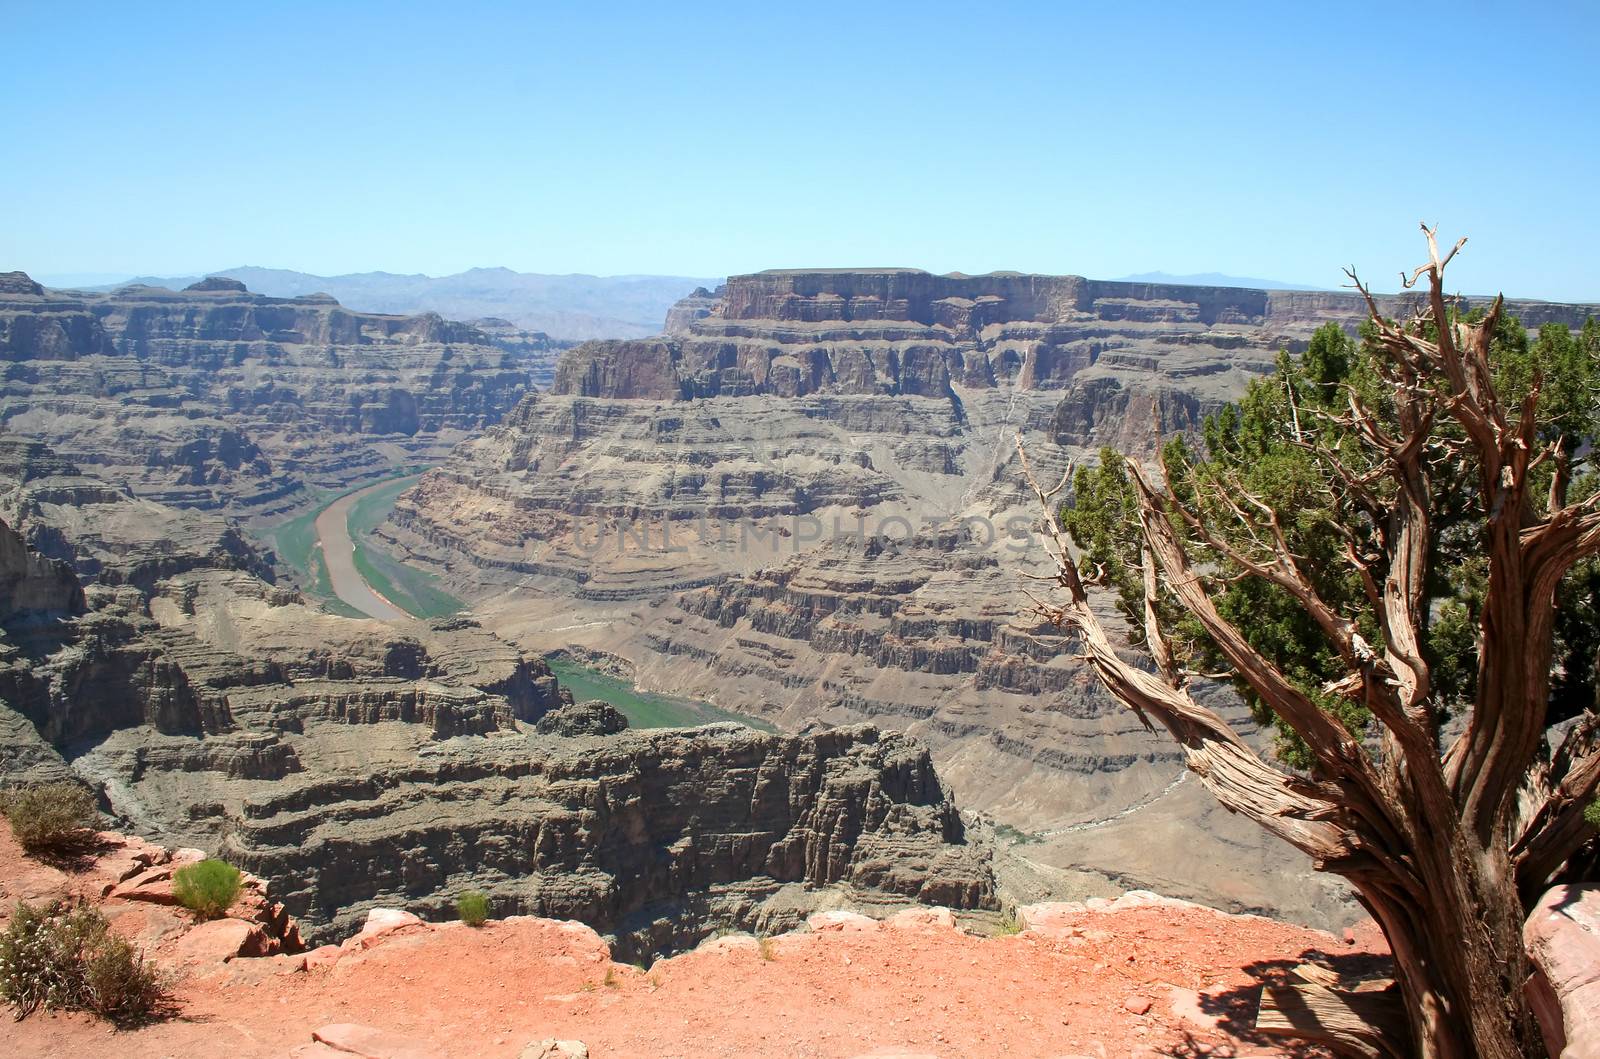 The view from Guano Point on the Grand Canyon West Rim overlooking the Colorado River.